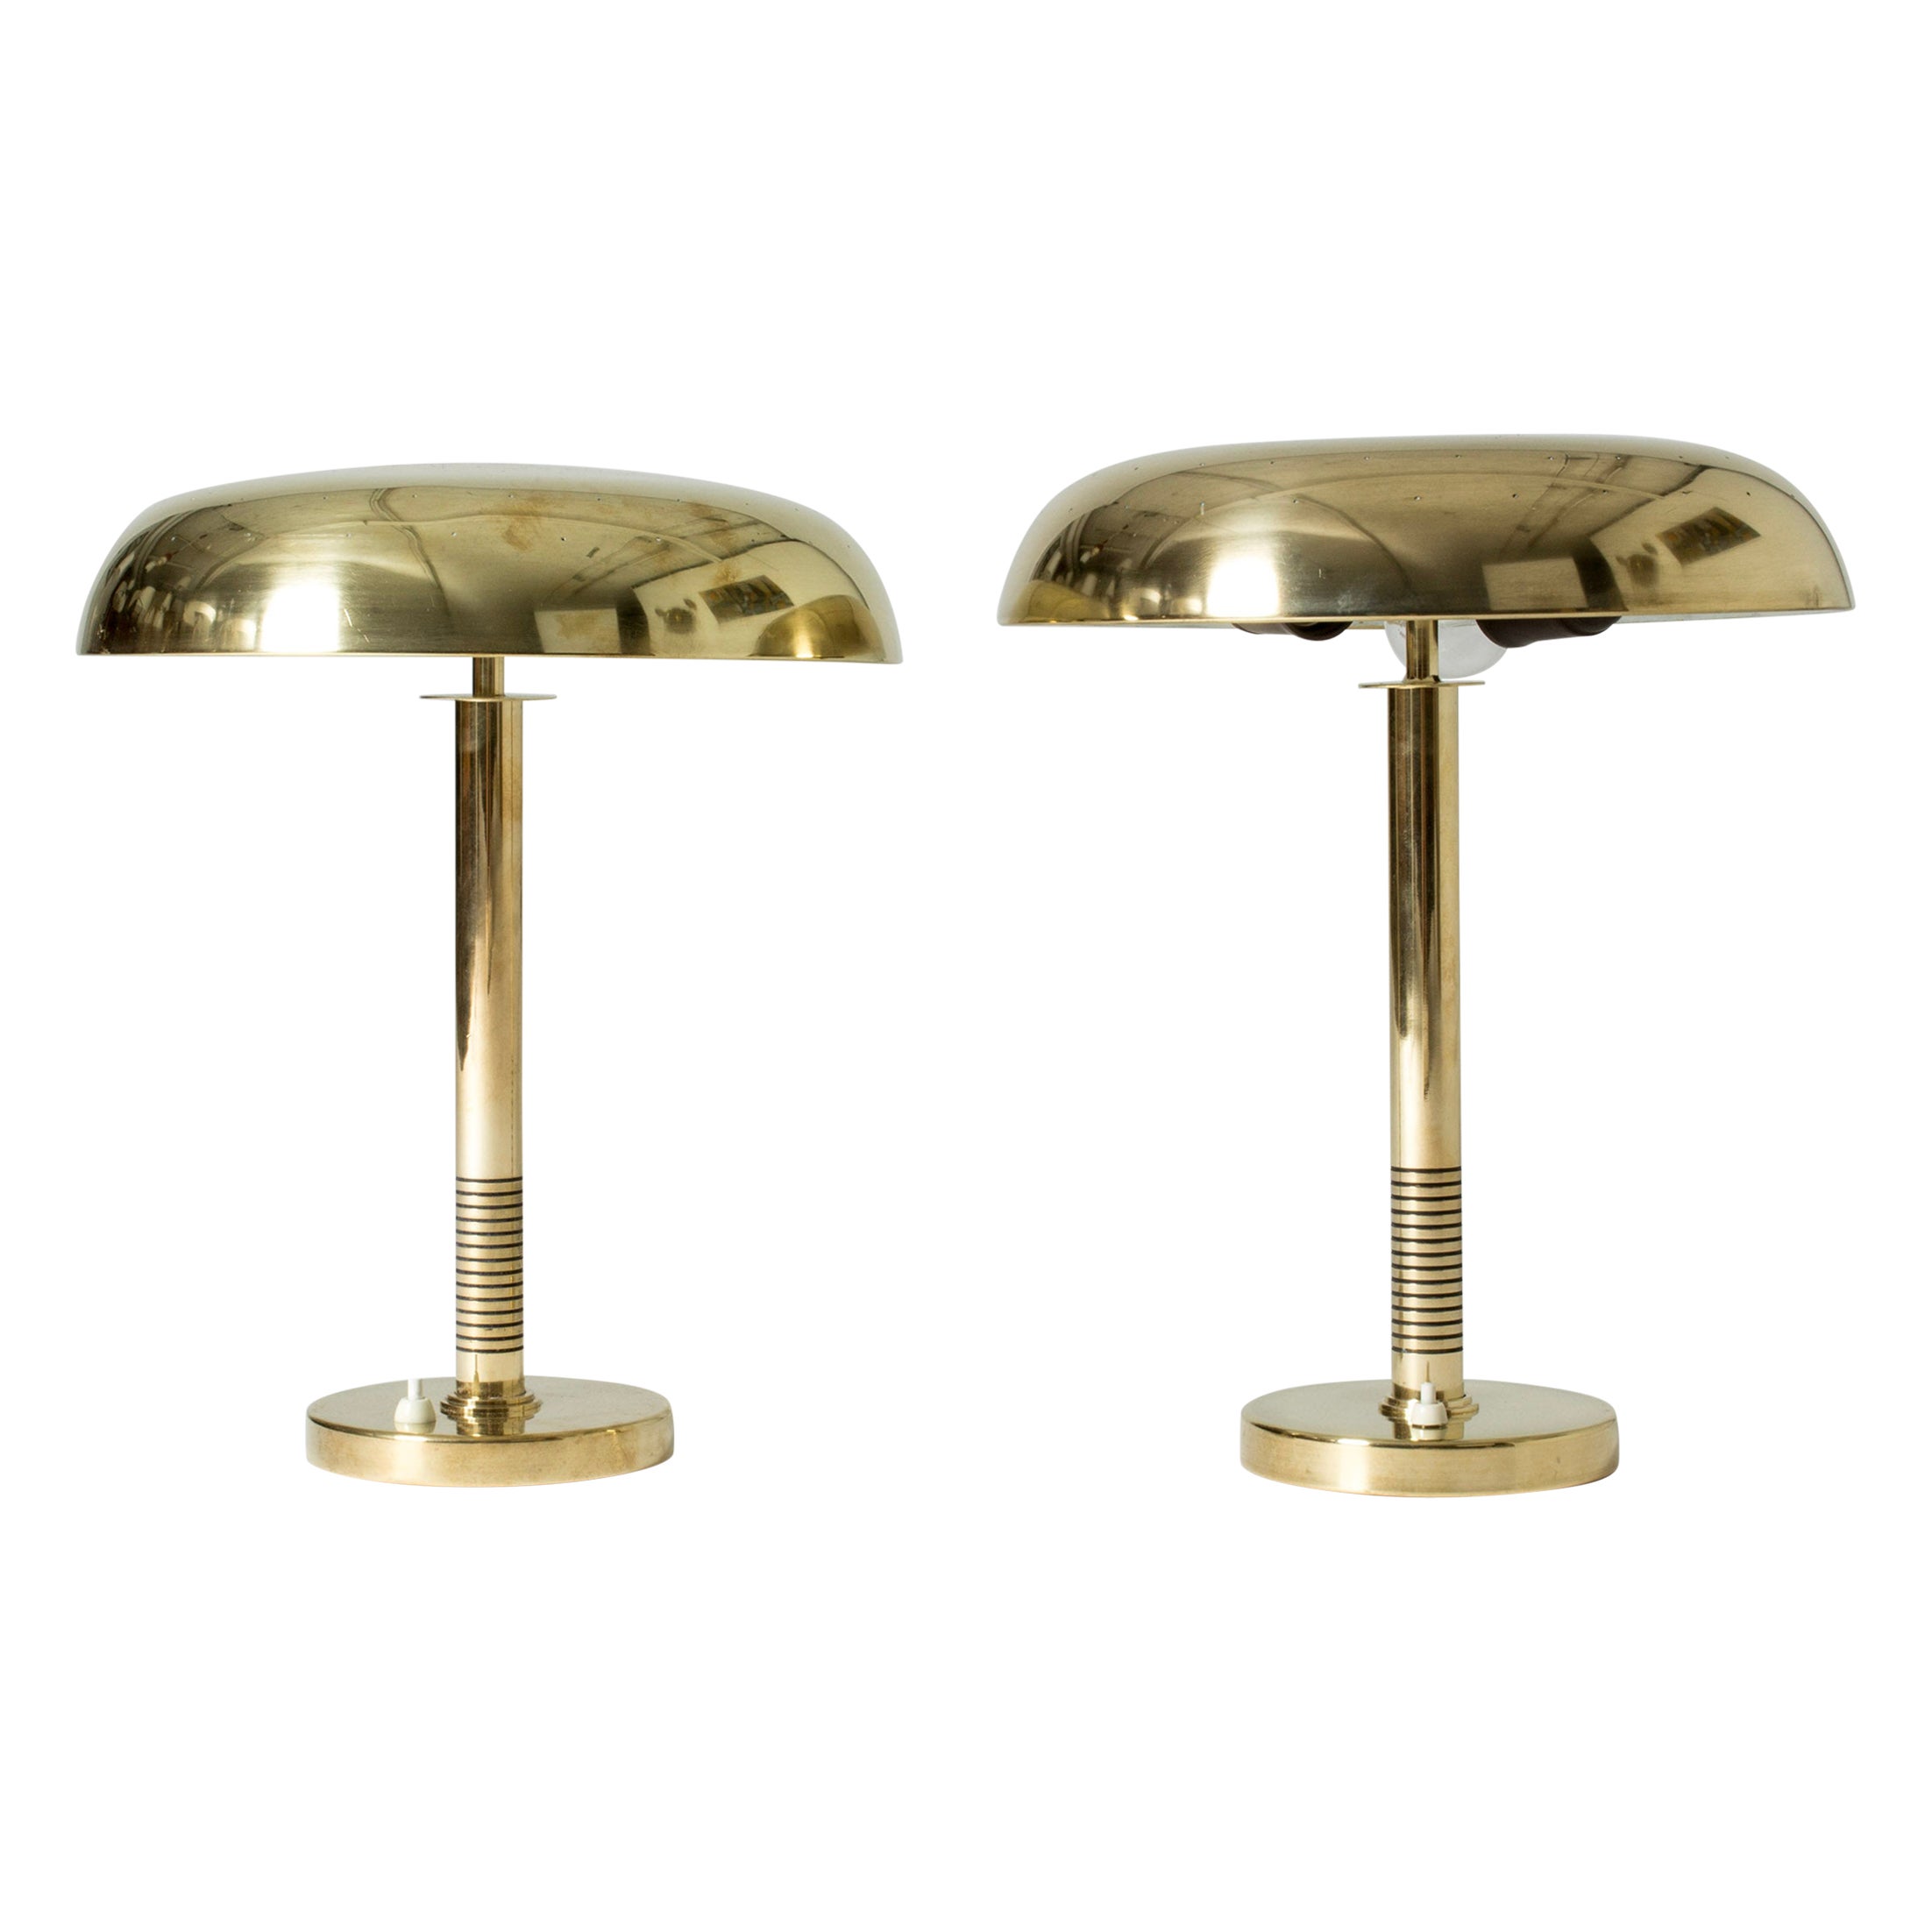 Midcentury Modern Brass Table Lamps, Boréns, Sweden, 1950s